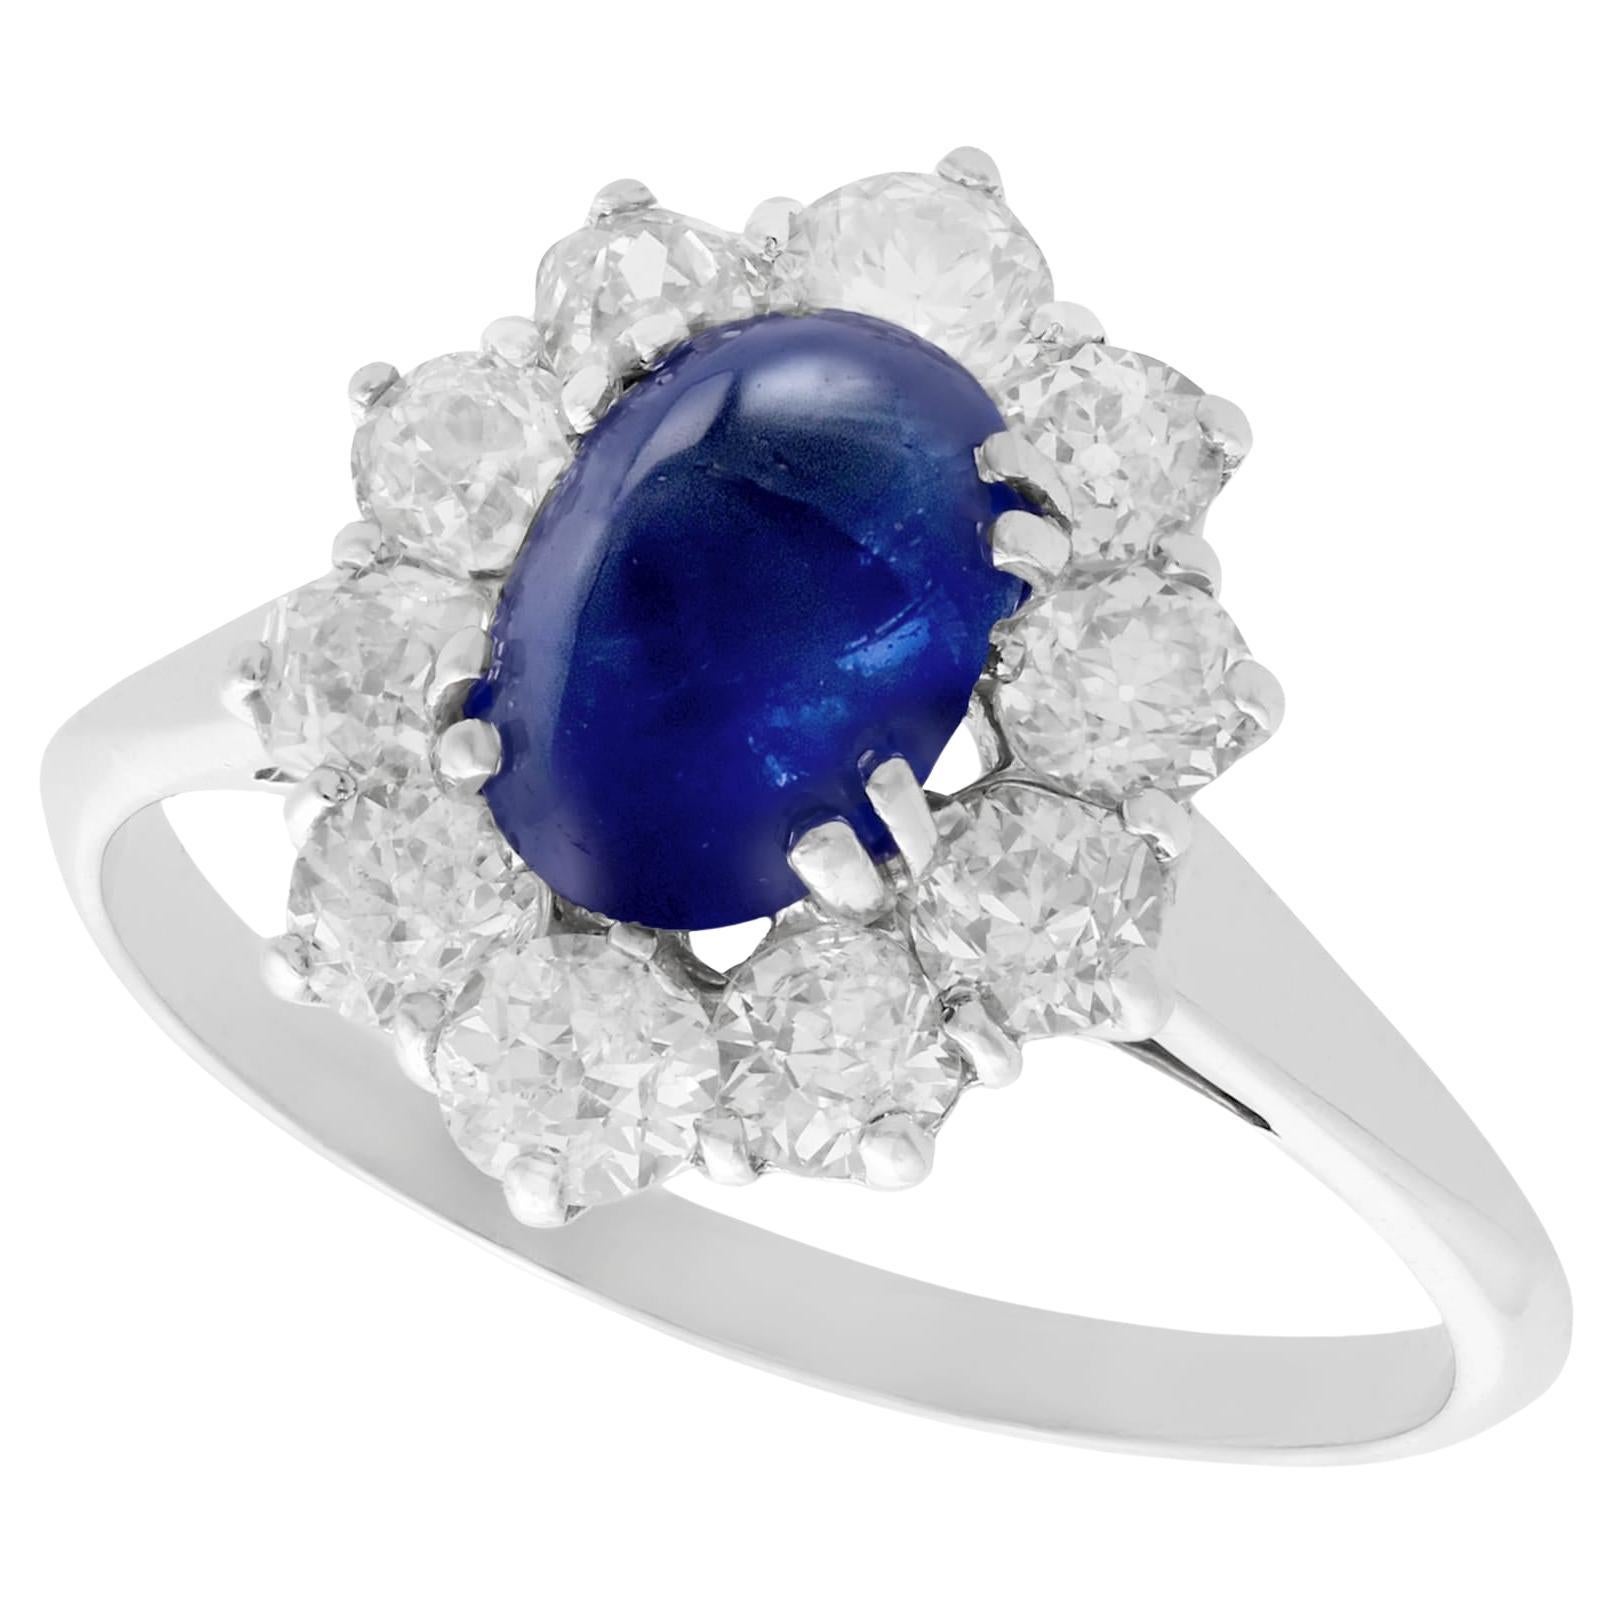 1940s 2.17 Carat Cabochon Cut Sapphire and Diamond Gold Cluster Ring